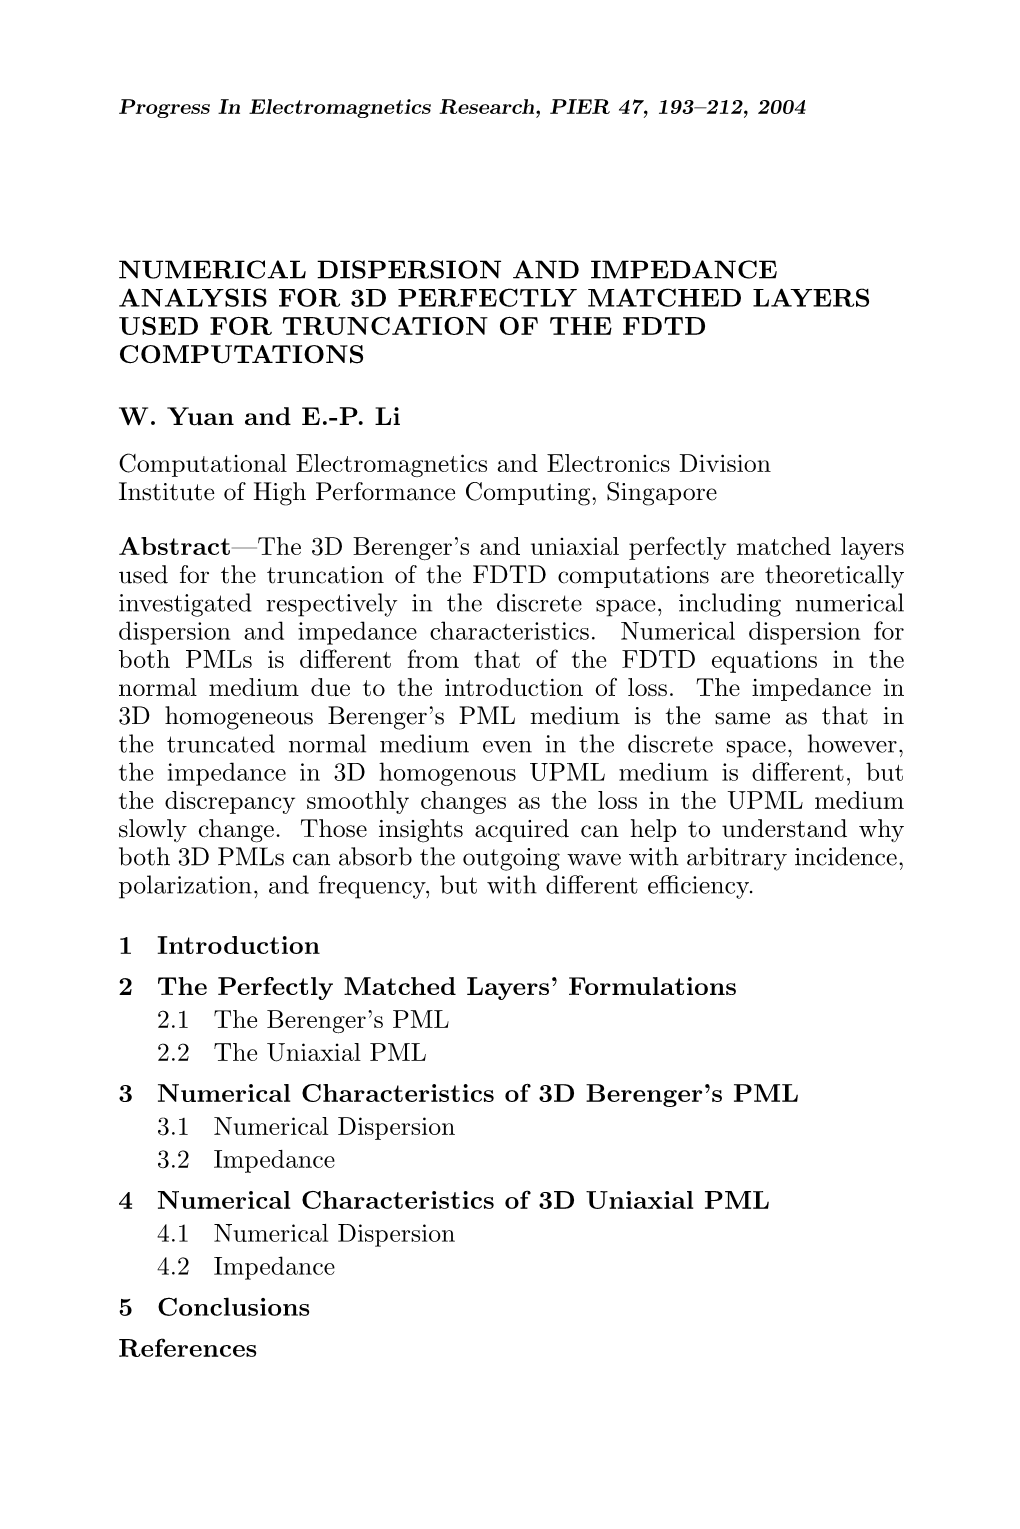 NUMERICAL DISPERSION and IMPEDANCE ANALYSIS for 3D PERFECTLY MATCHED LAYERS USED for TRUNCATION of the FDTD COMPUTATIONS W. Yuan